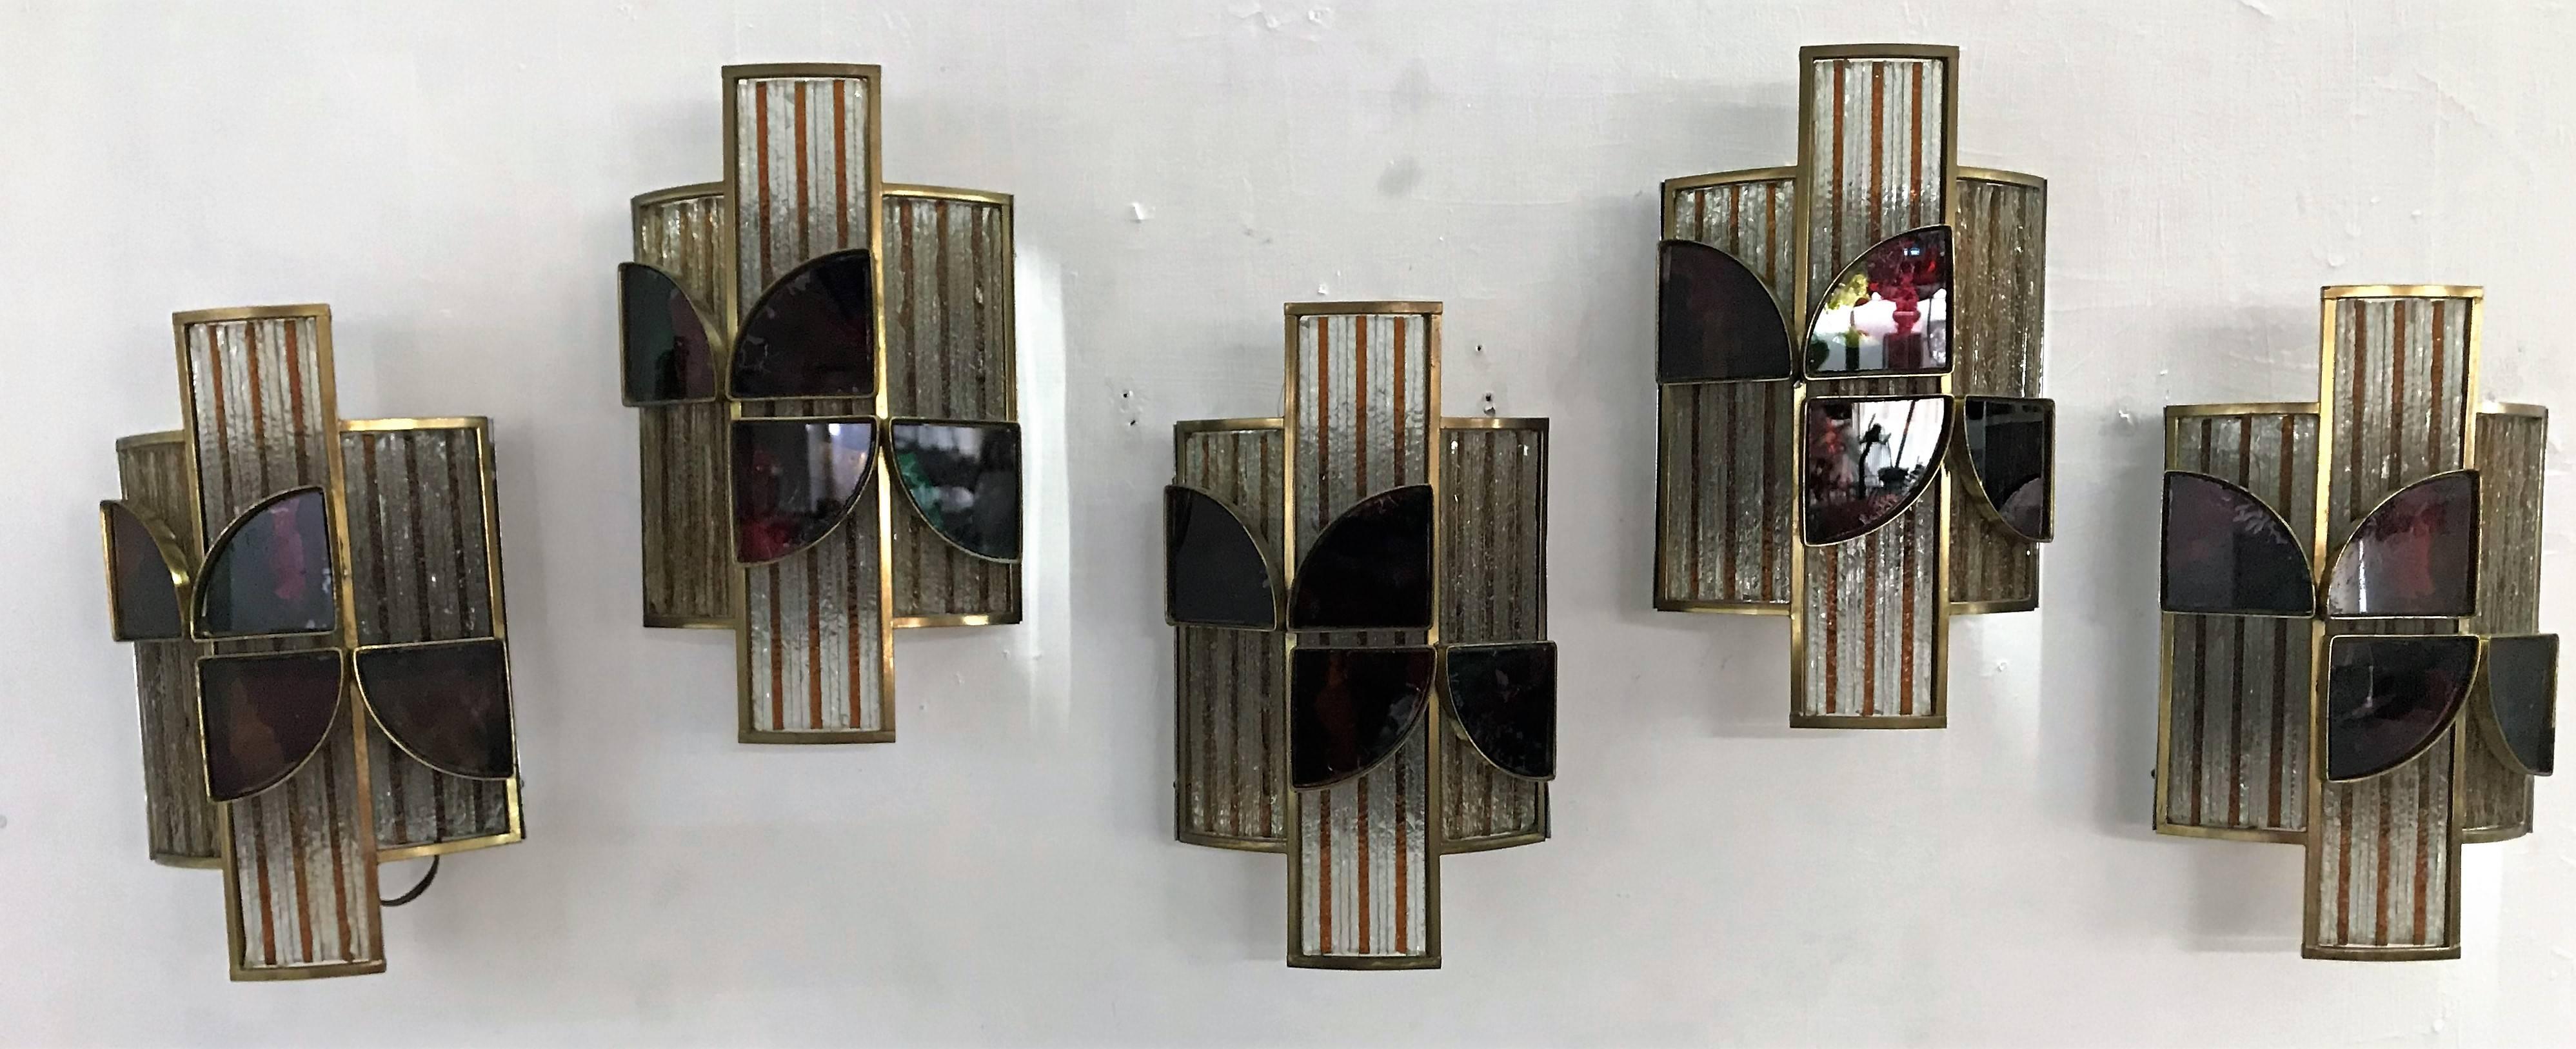 Brutalist 5 Mid-Century Modern Sconces by Poliarte, Italy, circa 1960